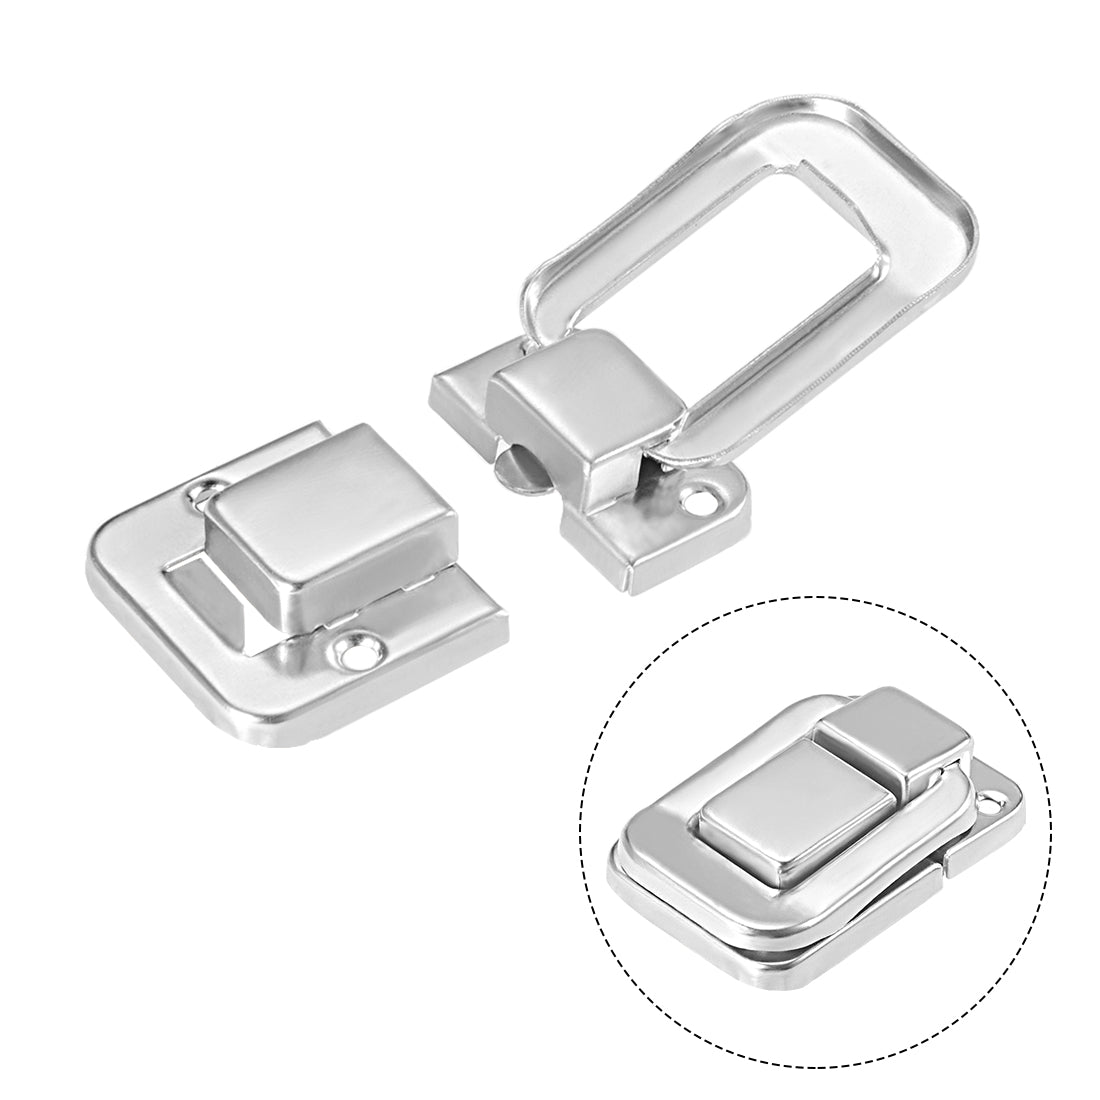 uxcell Uxcell Toggle Latch, 37mm Retro Style Silver Tone Decorative Hasp Jewelry Wooden Box Catch w Screws 5 pcs